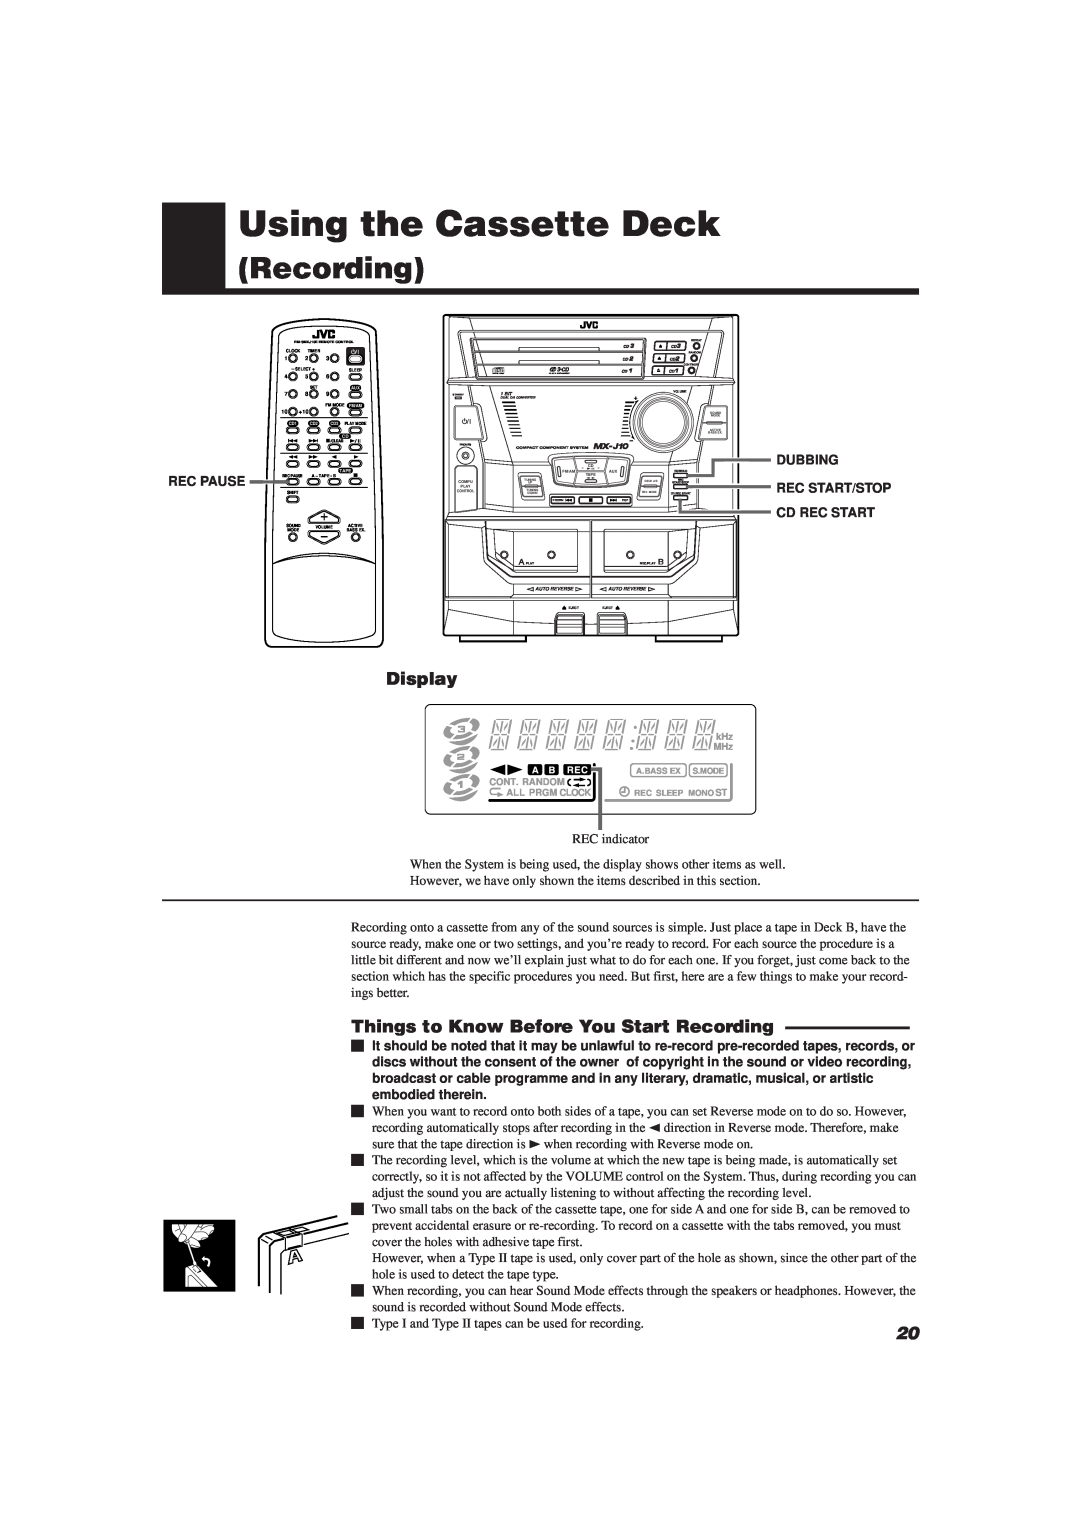 JVC CA-MXJ10 manual Using the Cassette Deck, Display, Things to Know Before You Start Recording, Rec Pause 